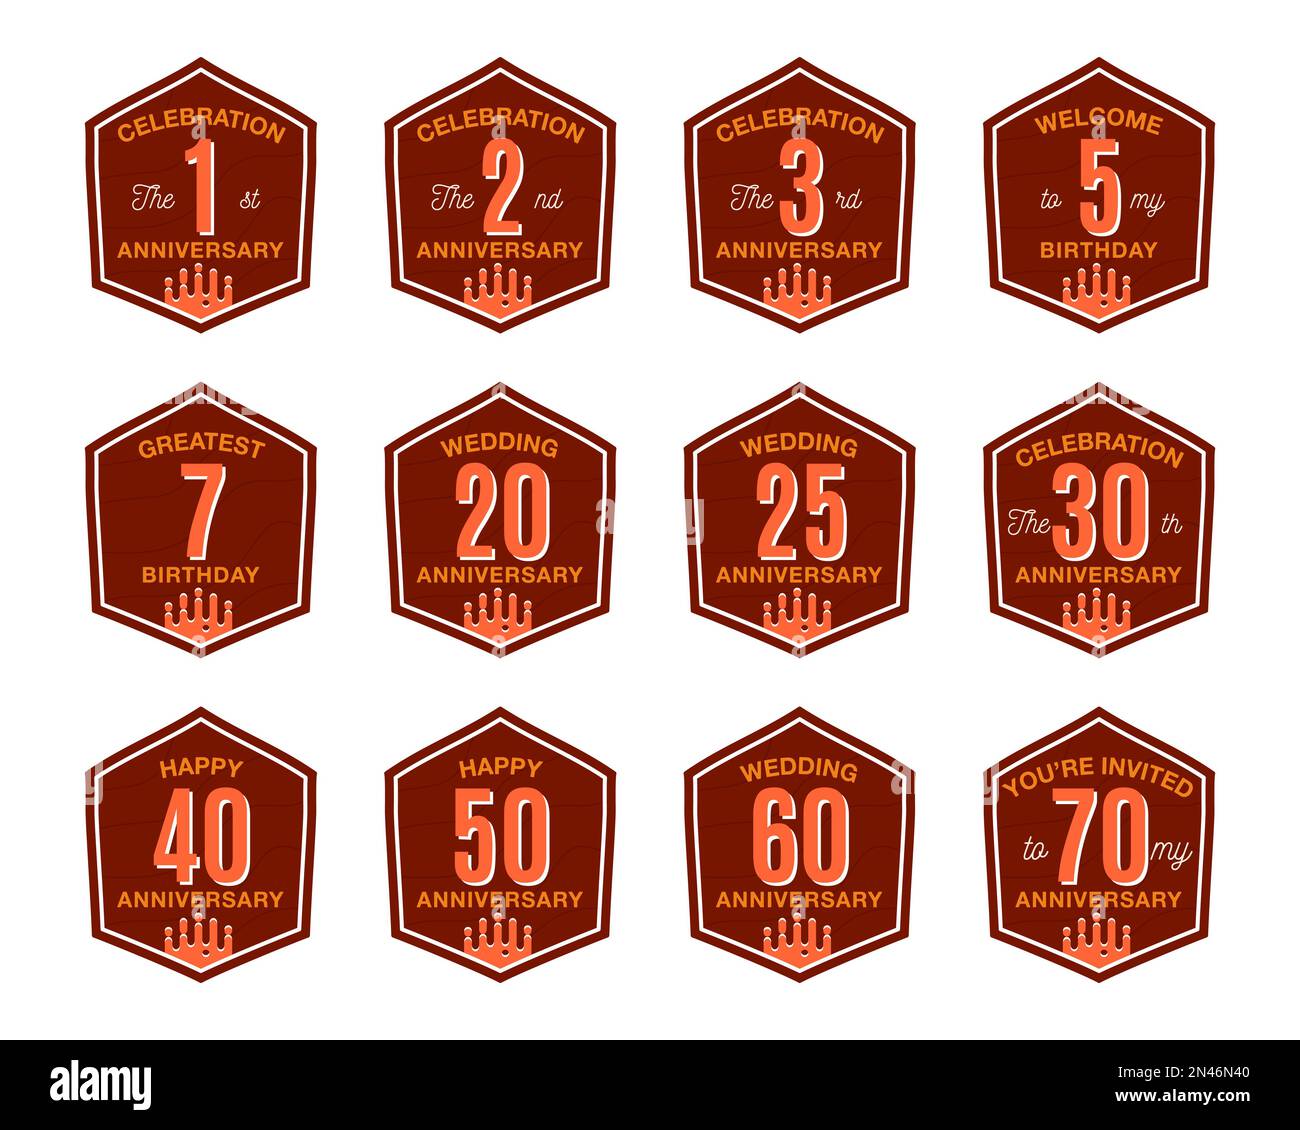 Anniversary Logo Templates Collection. Wedding badges in flat modern style and different color palletes. Birthday anniversary labels set. Stock vector Stock Vector